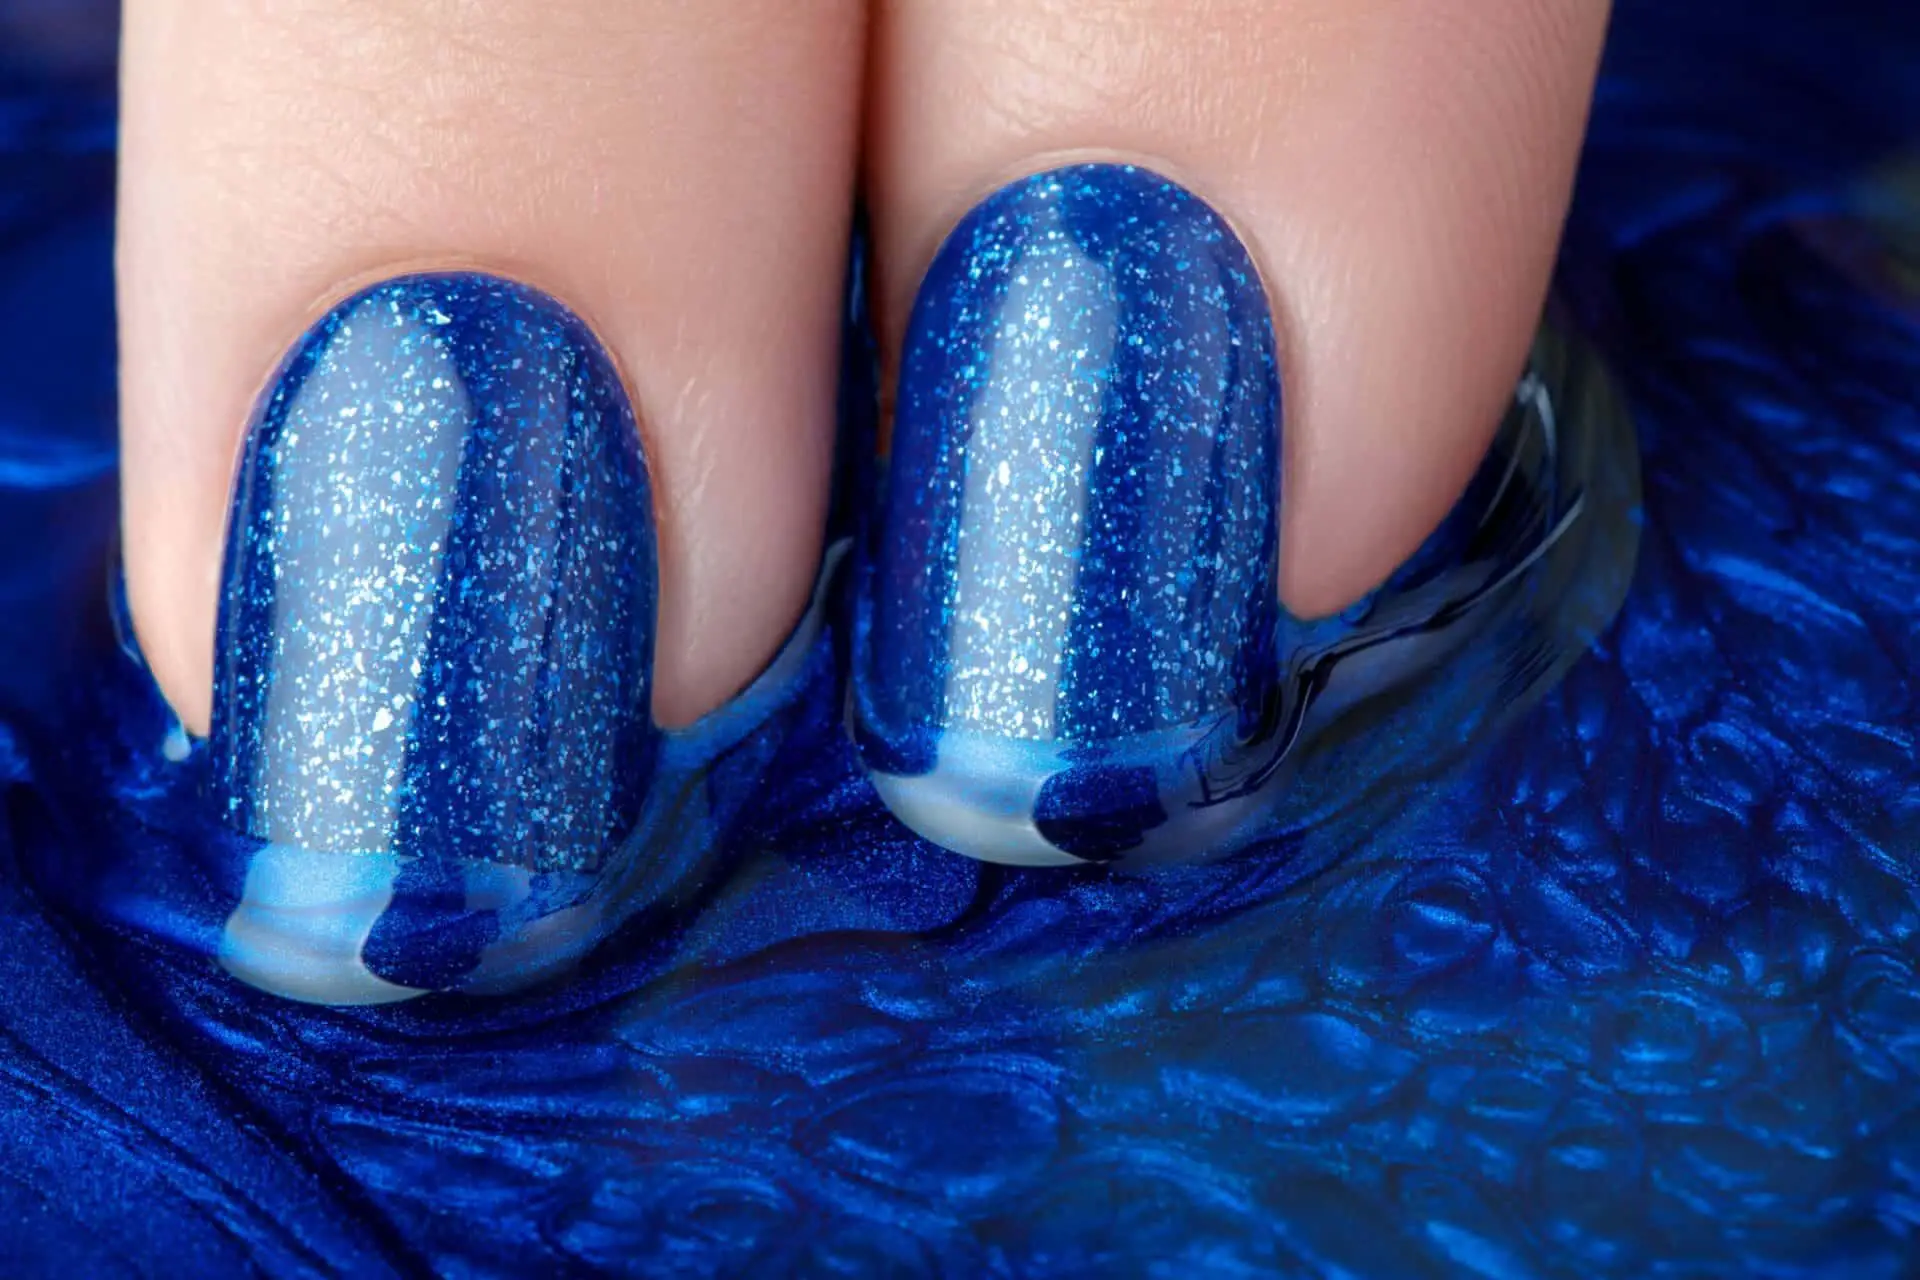 Summer nail art ideas to rock in 2021 : Gradient blue summer nails